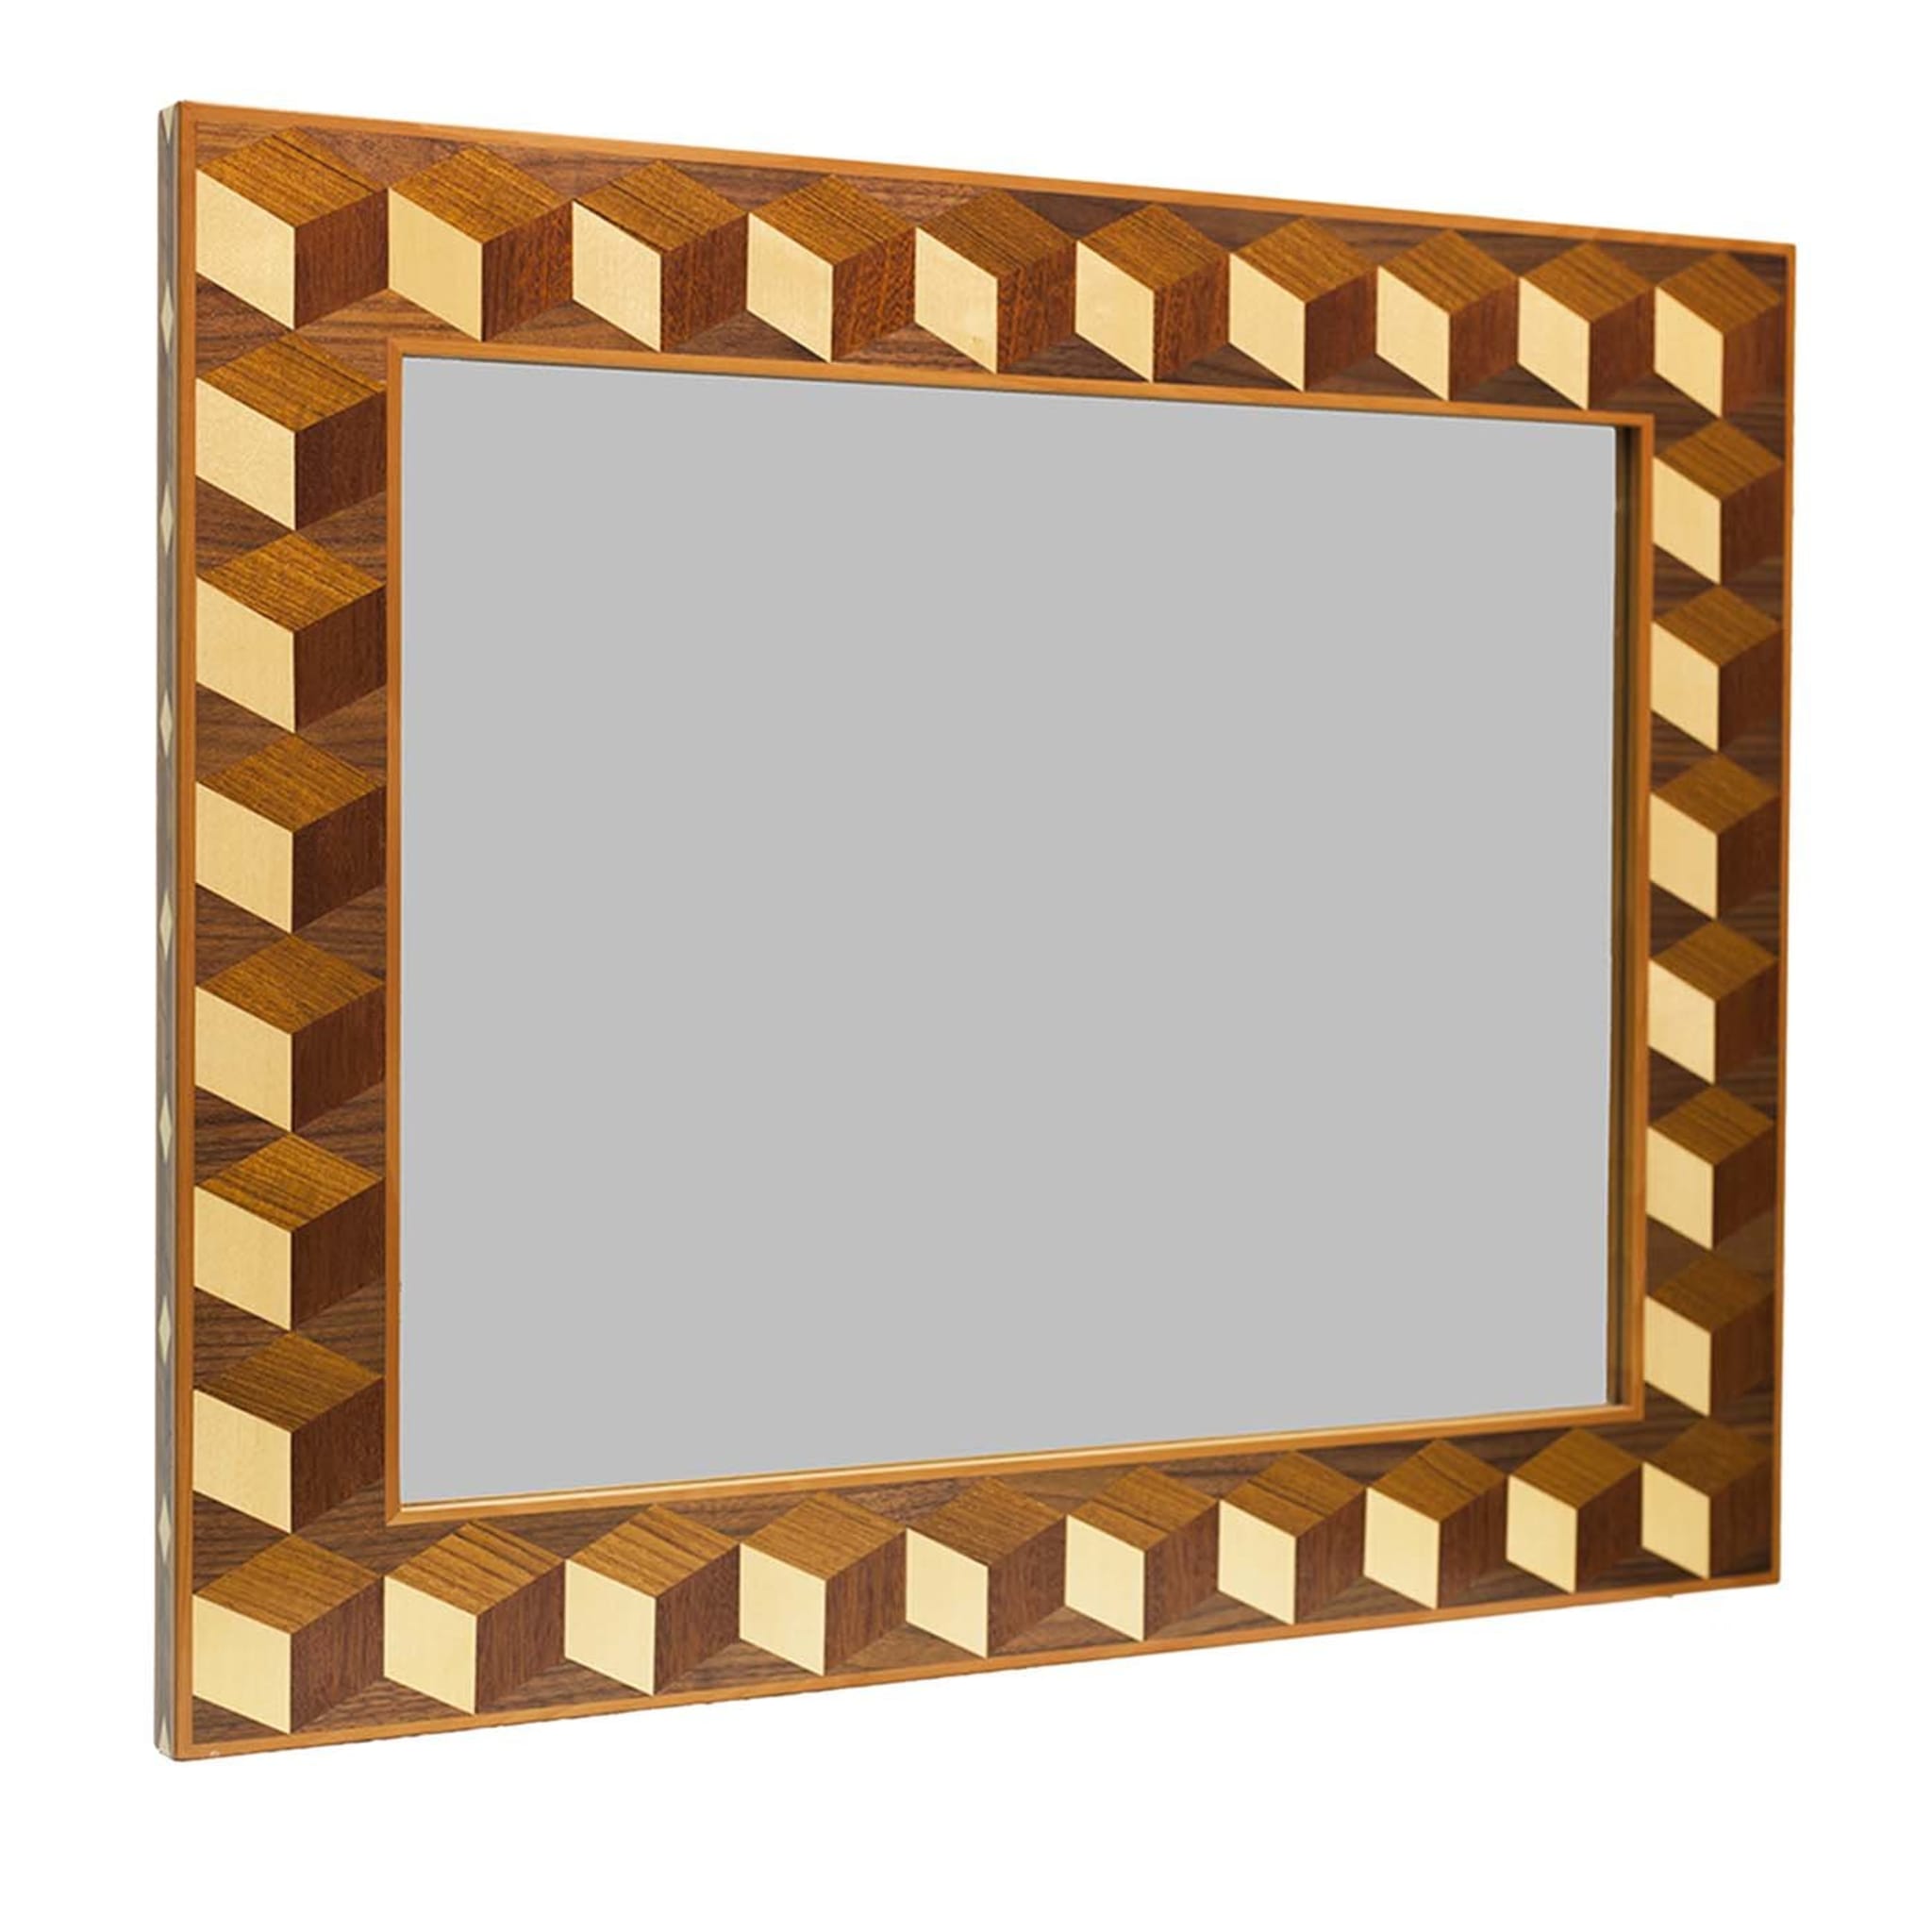 Ode to Cubism Frame - Main view